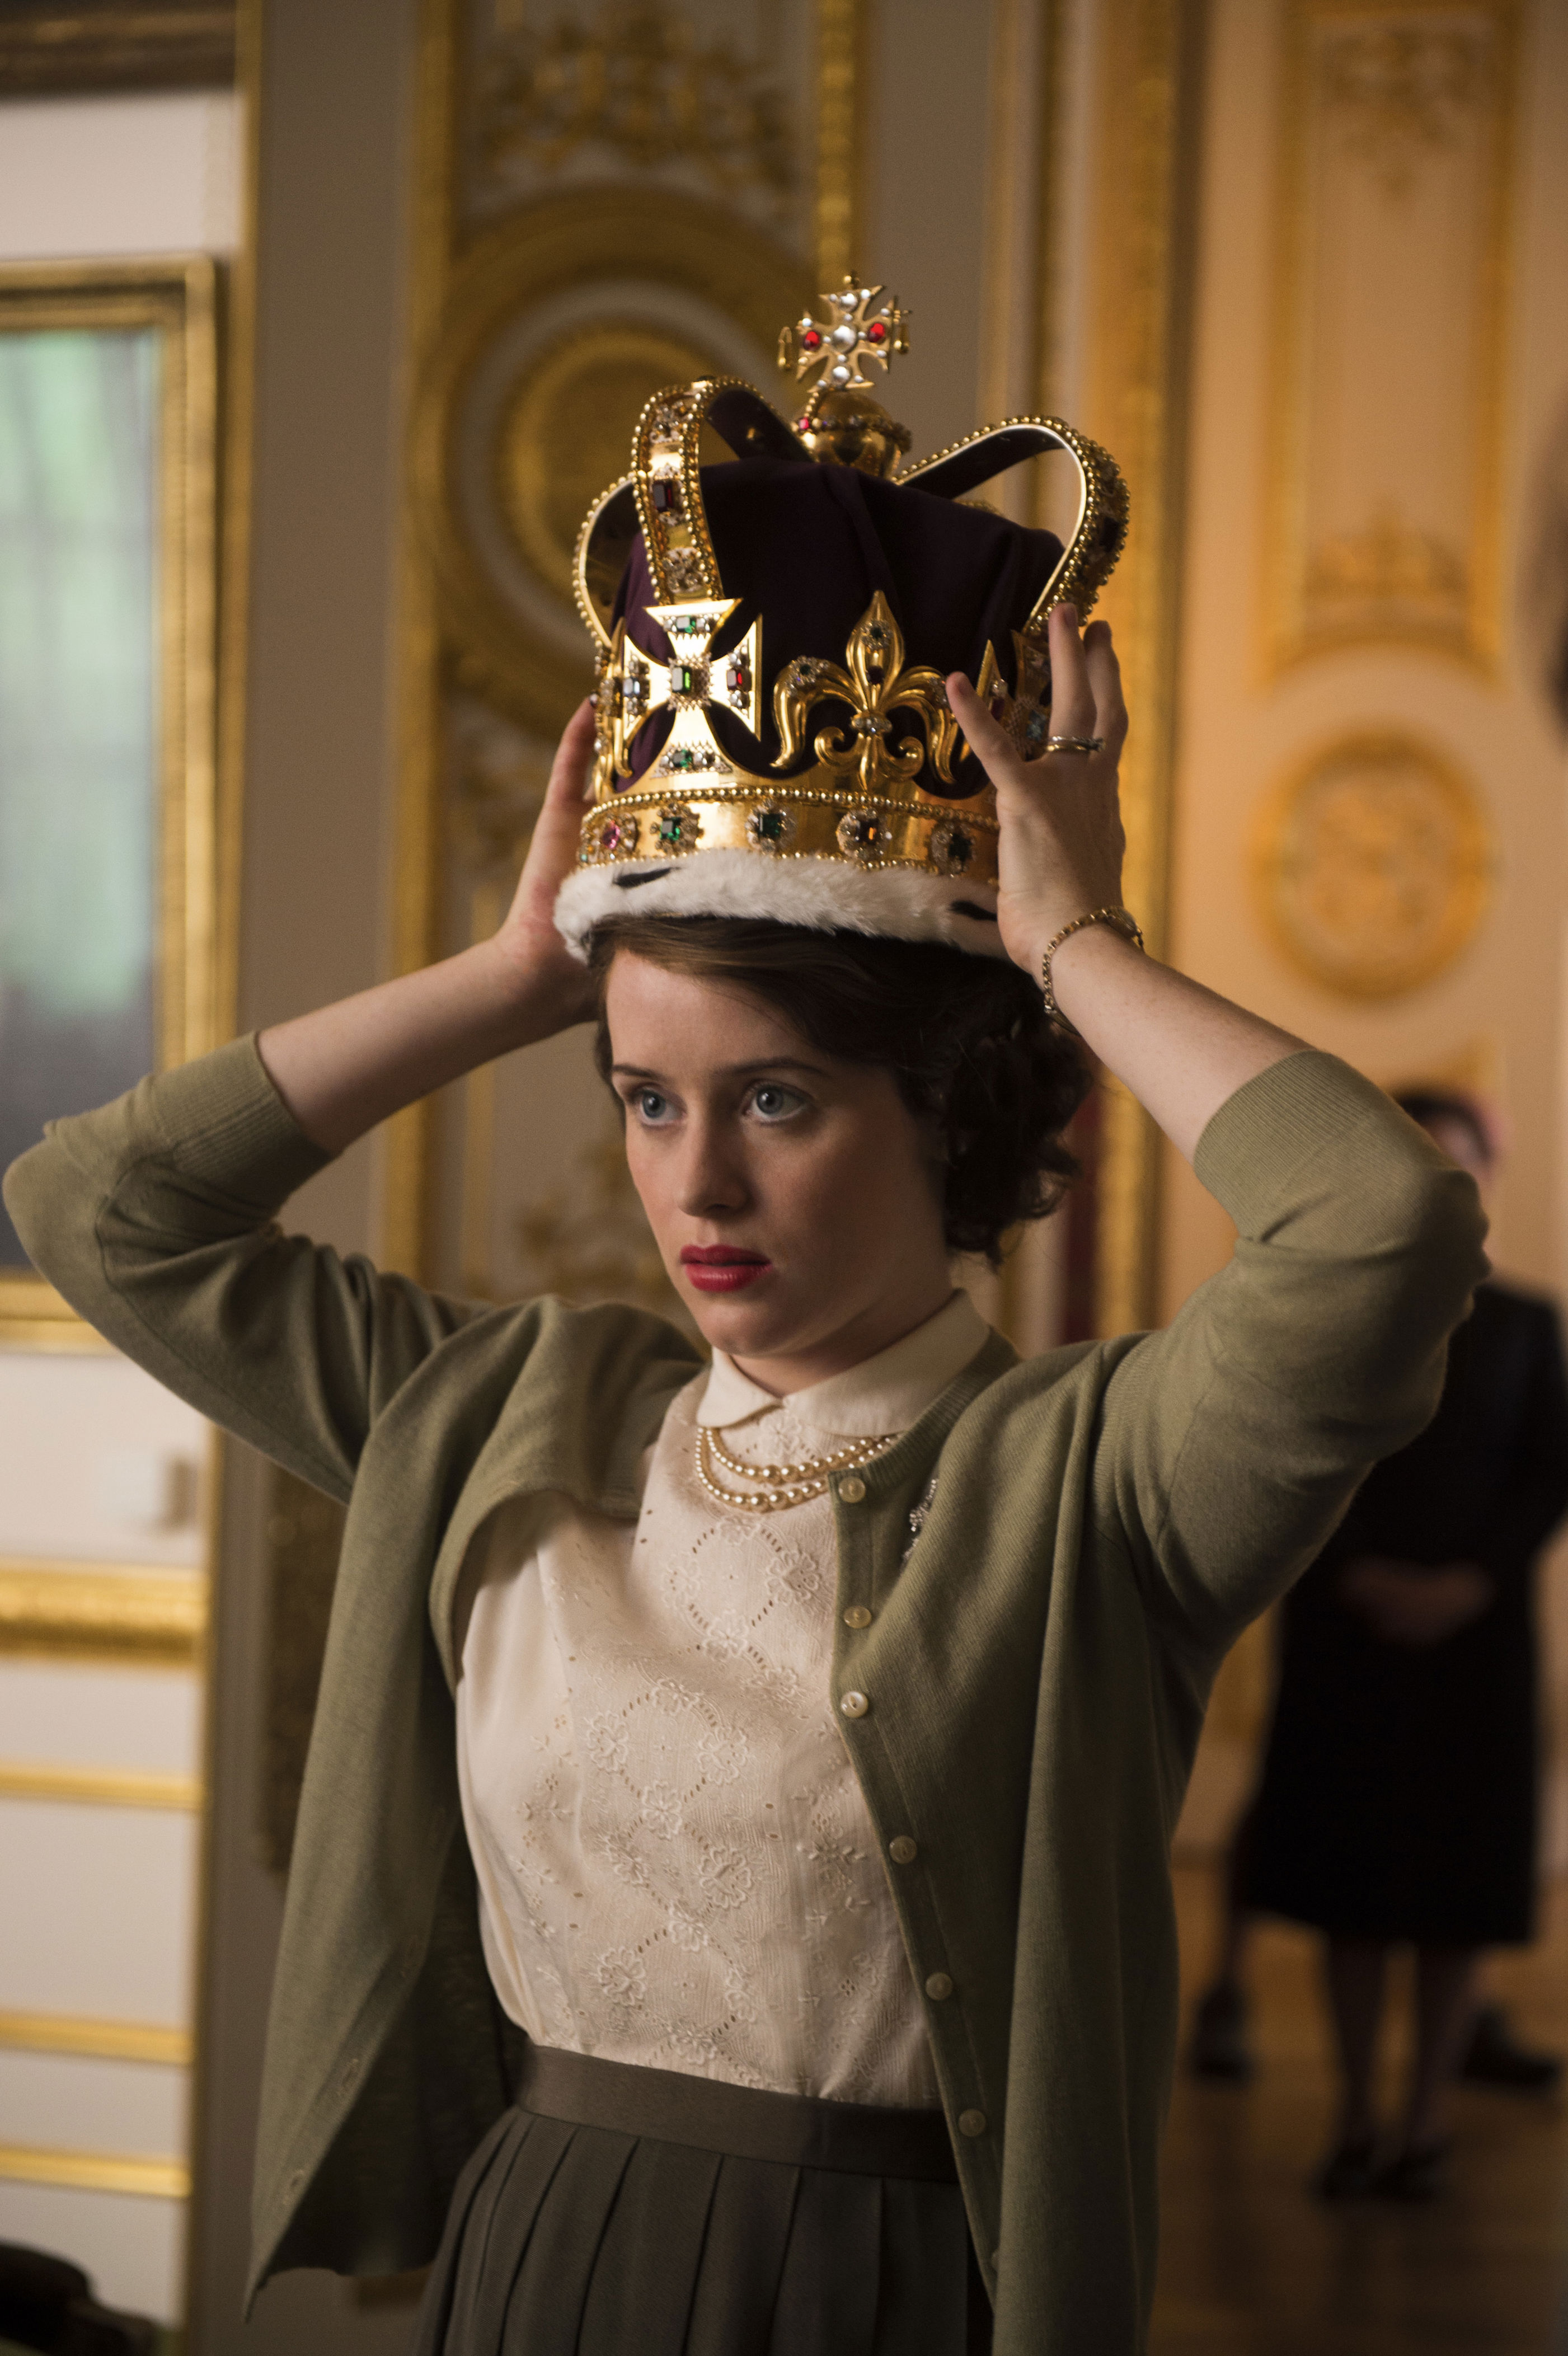 <p>Claire Foy starred as Britain's Queen Elizabeth II on the Netflix original series "The Crown" when the award-winning historical drama kicked off set in 1947. The series chronicles the fascinating journey of the longest reigning monarch in British history through her marriage to Prince Philip (initially played by Matt Smith), her early years on the throne and the choices -- and sacrifices -- she makes to become one of the most legendary queens the world has ever known. </p><p>Seasons 3 and 4 showcased a new cast including Olivia Colman as the monarch and "Outlander" star Tobias Menzies as Philip in their middle-age years (both won Emmys for their work in 2021). </p><p>A fifth season with a new cast yet again -- including Imelda Staunton as Elizabeth, Jonathan Pryce as Philip, Lesley Manville as Princess Margaret, Dominic West as Prince Charles, Elizabeth Debicki as Princess Diana and more -- debuted in 2022 and a sixth and final season premiered at the end of 2023.</p><p>MORE: <a href="https://www.wonderwall.com/celebrity/photos/crown-cast-vs-real-life-royals-see-whos-playing-whom-3010964.gallery">How much actors on "The Crown" resemble the royals they're playing</a></p>